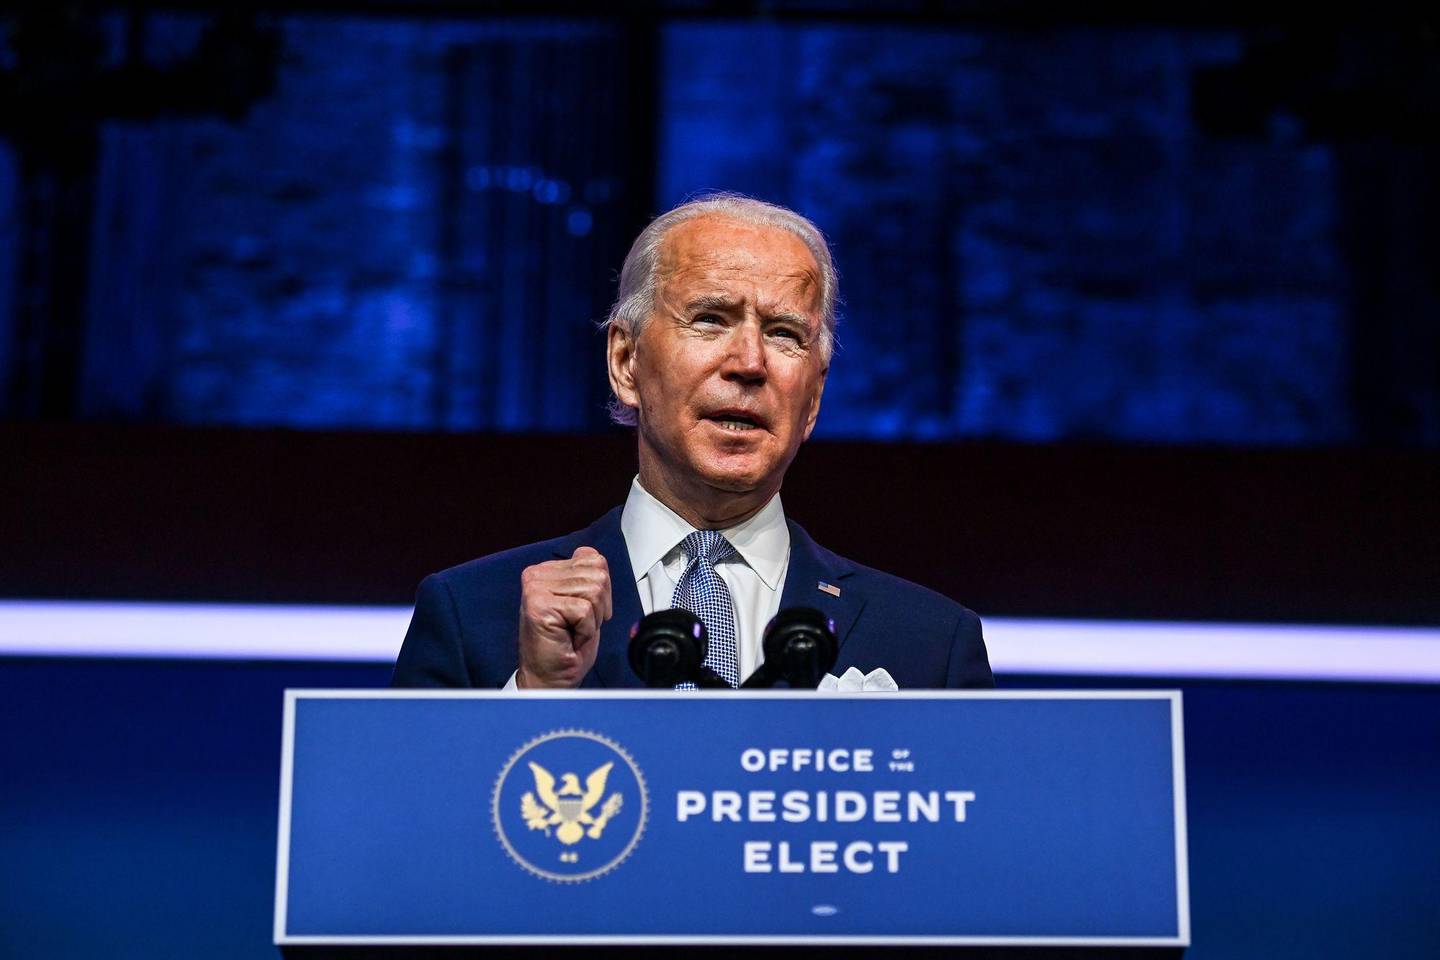 (FILES) In this file photo taken on November 24, 2020 US President-elect Joe Biden speaks during a cabinet announcement event in Wilmington, Delaware. - President-elect Joe Biden's victory in Arizona was finalized November 30, 2020, further cementing his win even as Donald Trump continues to make baseless claims of vote fraud. (Photo by CHANDAN KHANNA / AFP)